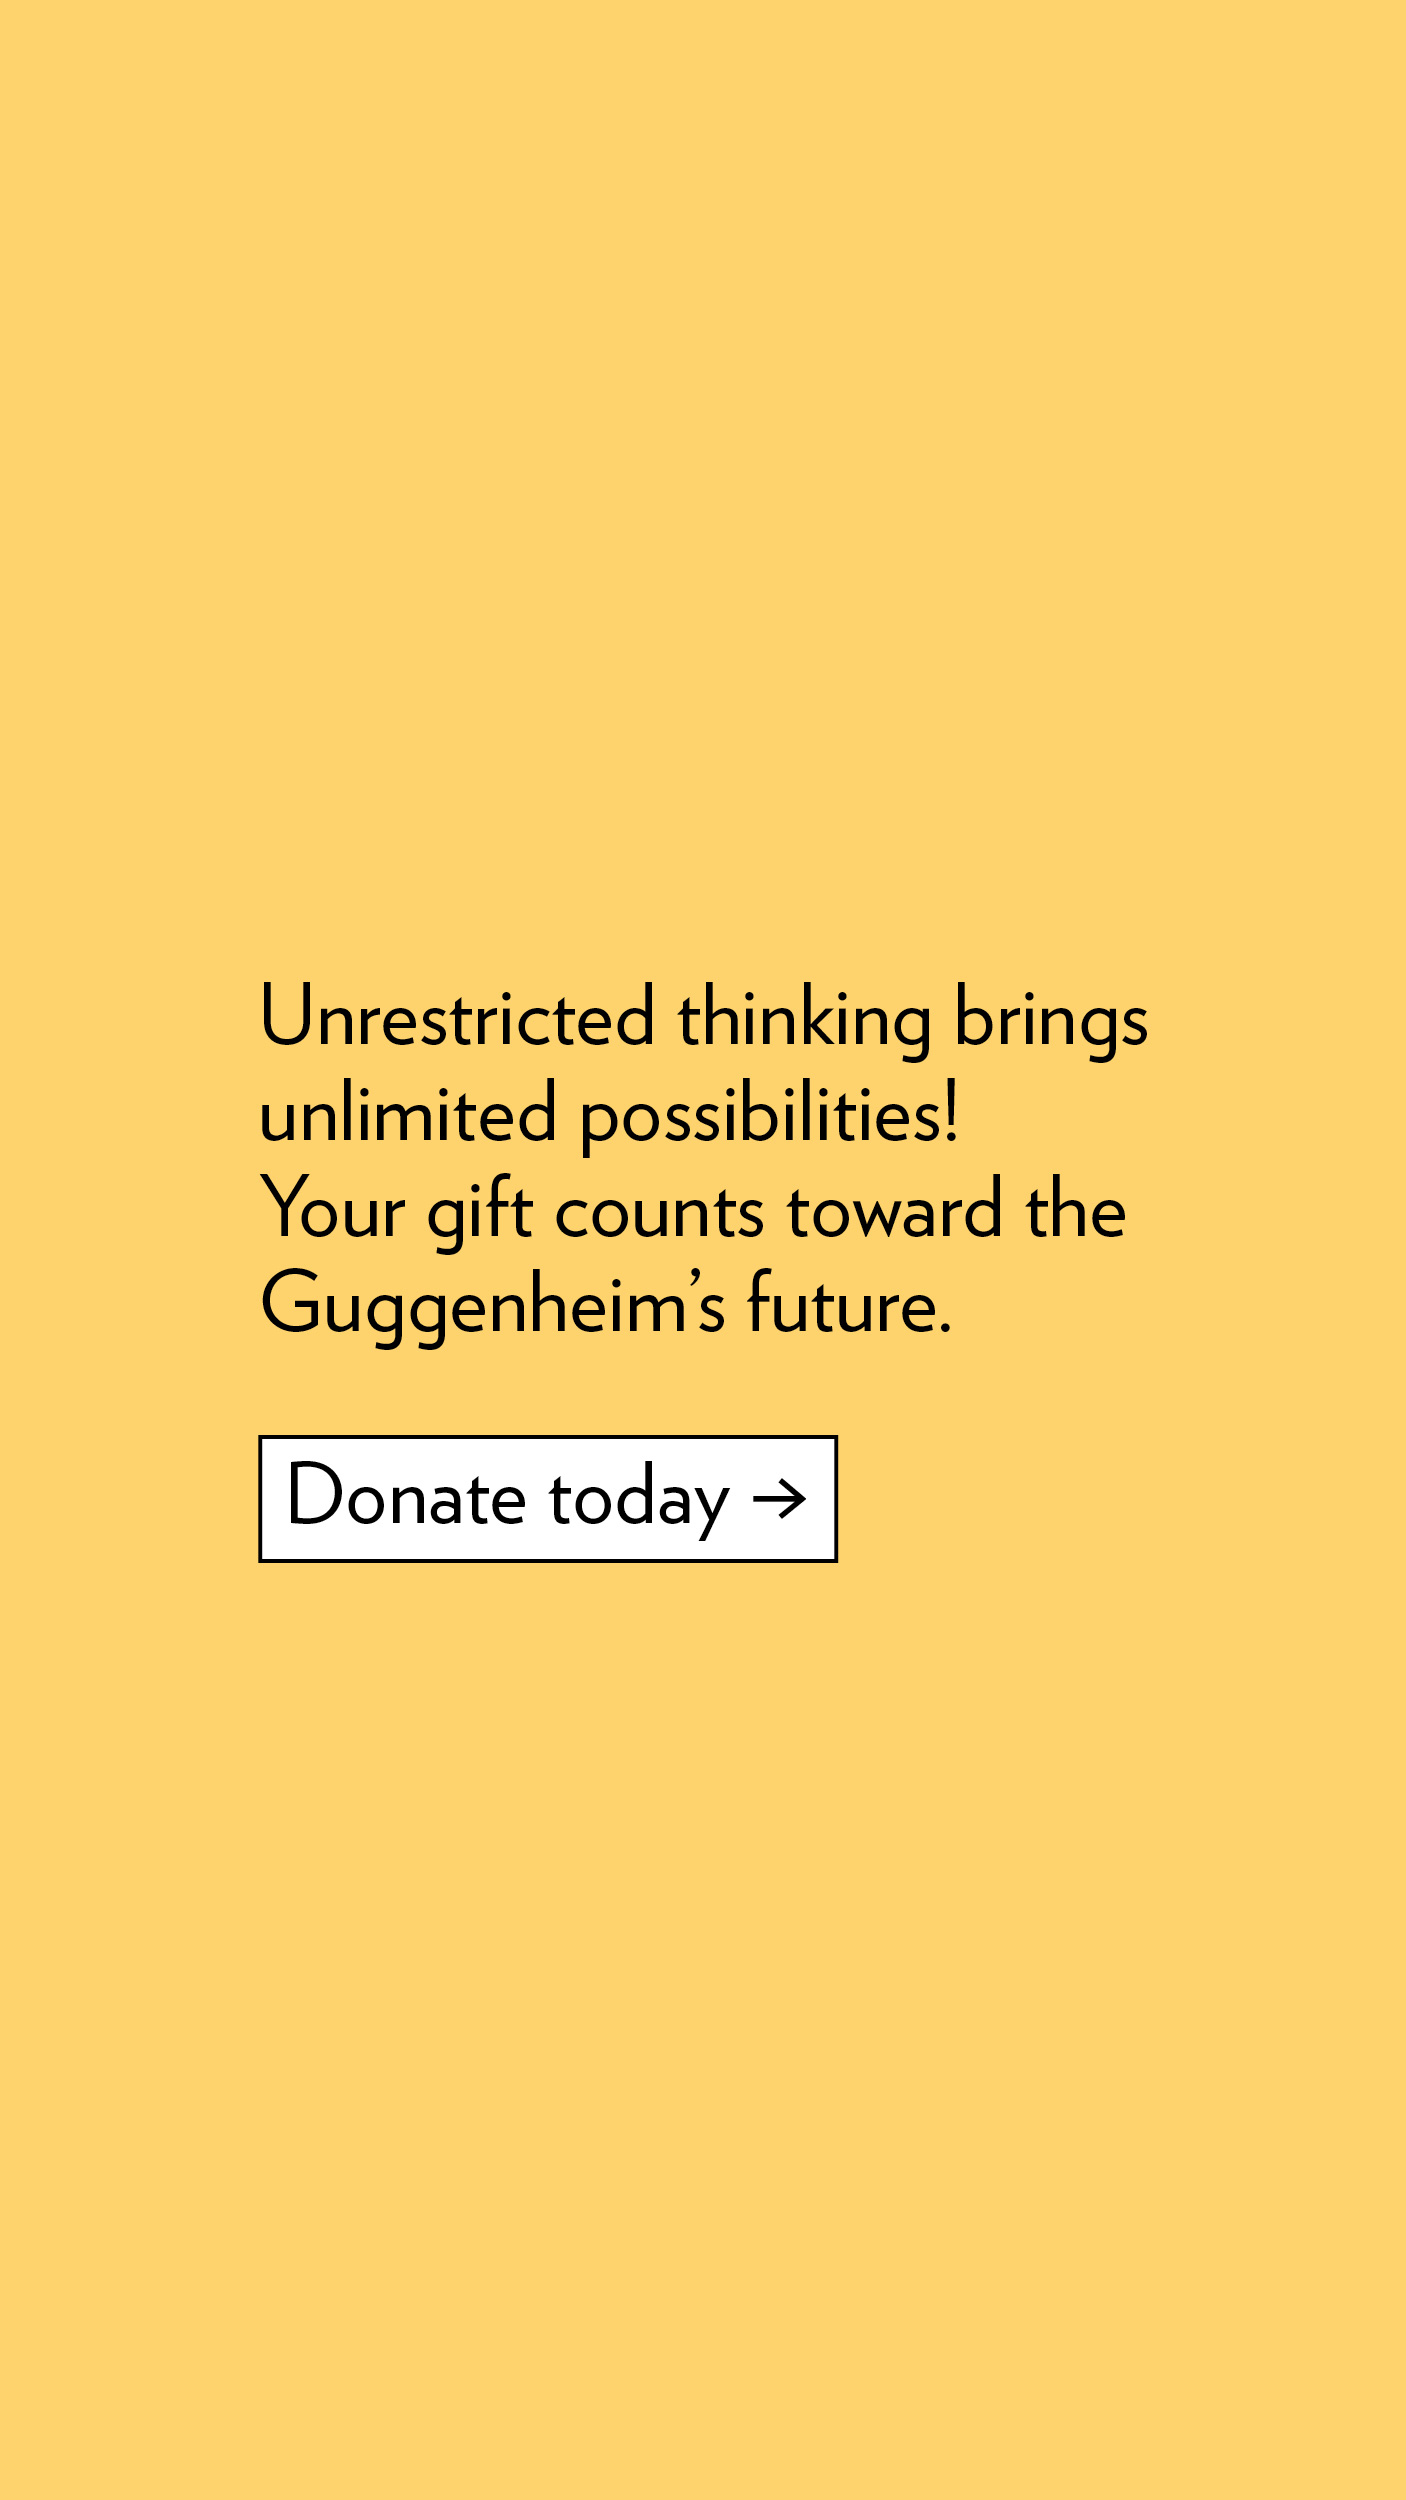 Unrestricted thinking brings unlimited possibilities! Your gift counts toward the Guggenheim's future. Donate today